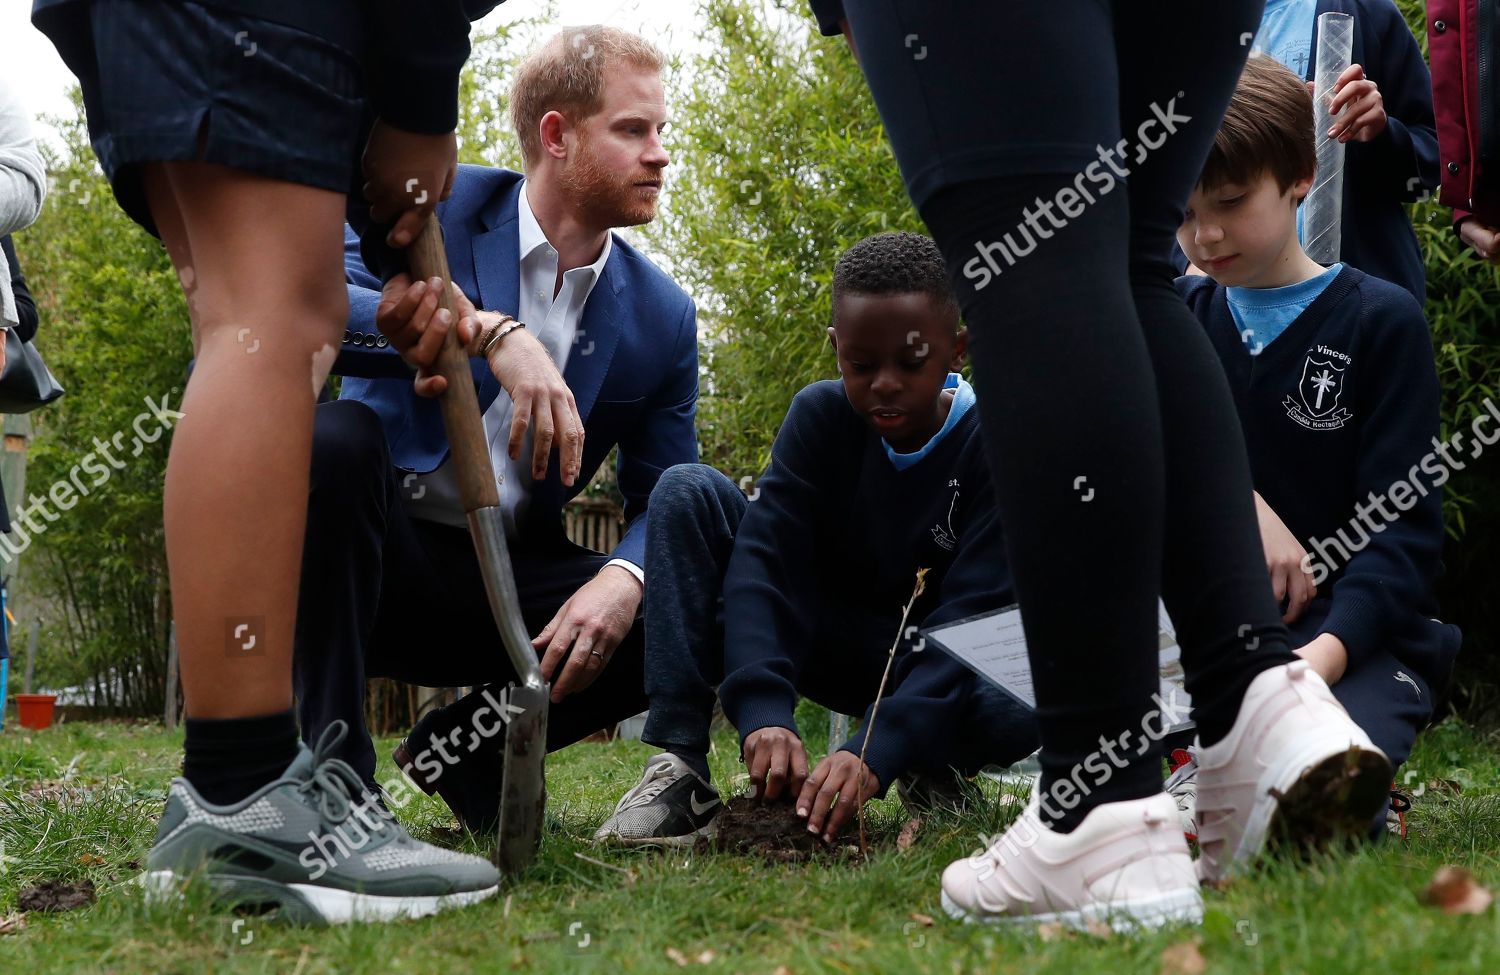 prince-harry-visits-st-vincents-catholic-primary-school-for-commonwealth-canopy-and-woodland-trust-tree-planting-ceremony-london-uk-shutterstock-editorial-10161063c.jpg